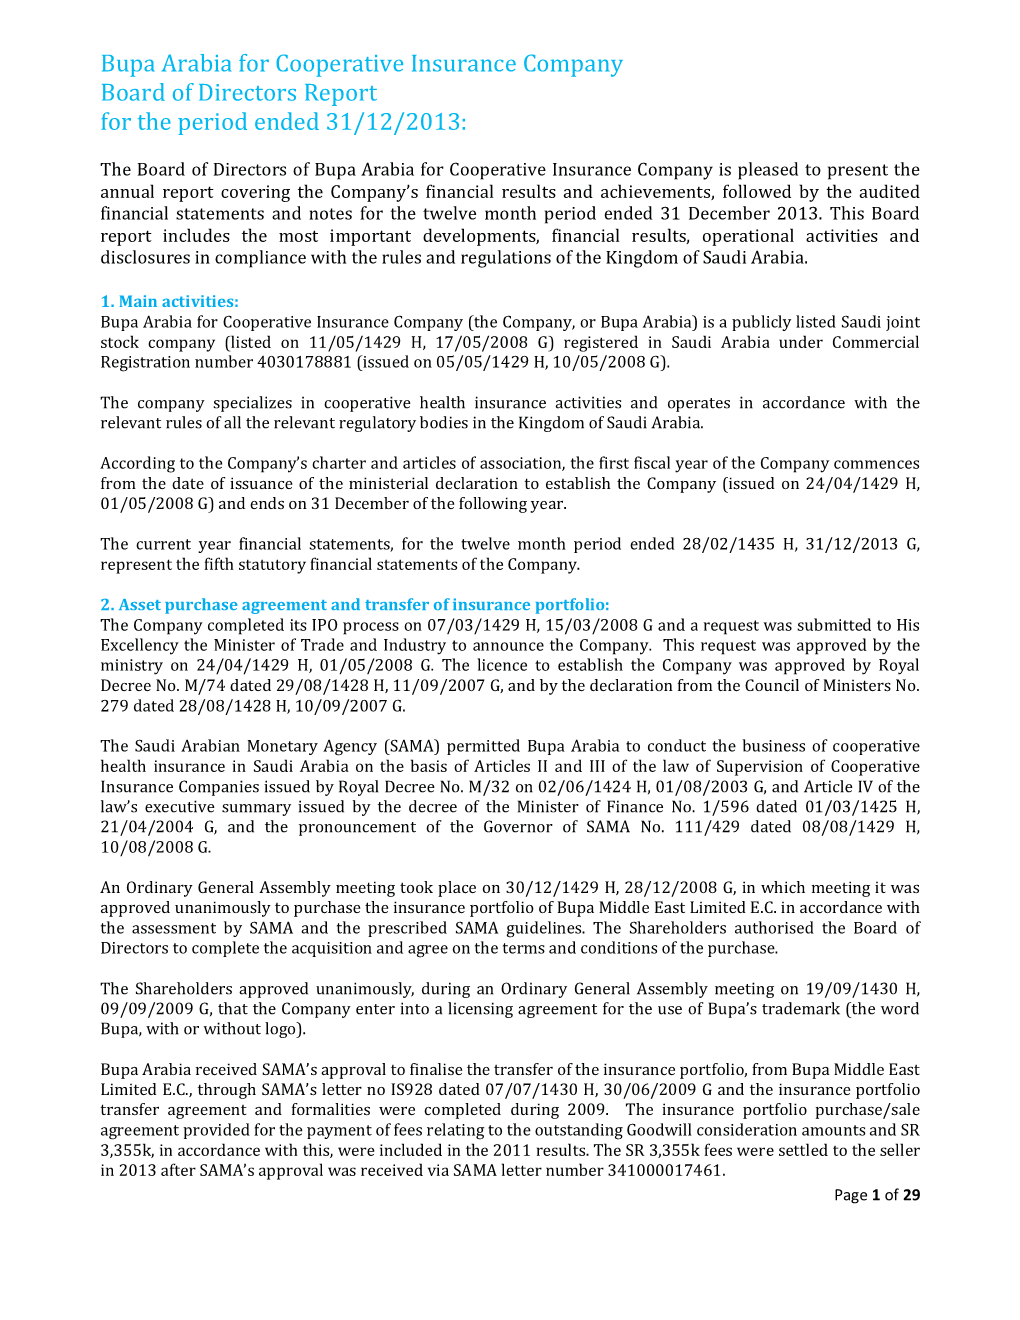 Bupa Arabia for Cooperative Insurance Company Board of Directors Report for the Period Ended 31/12/2013